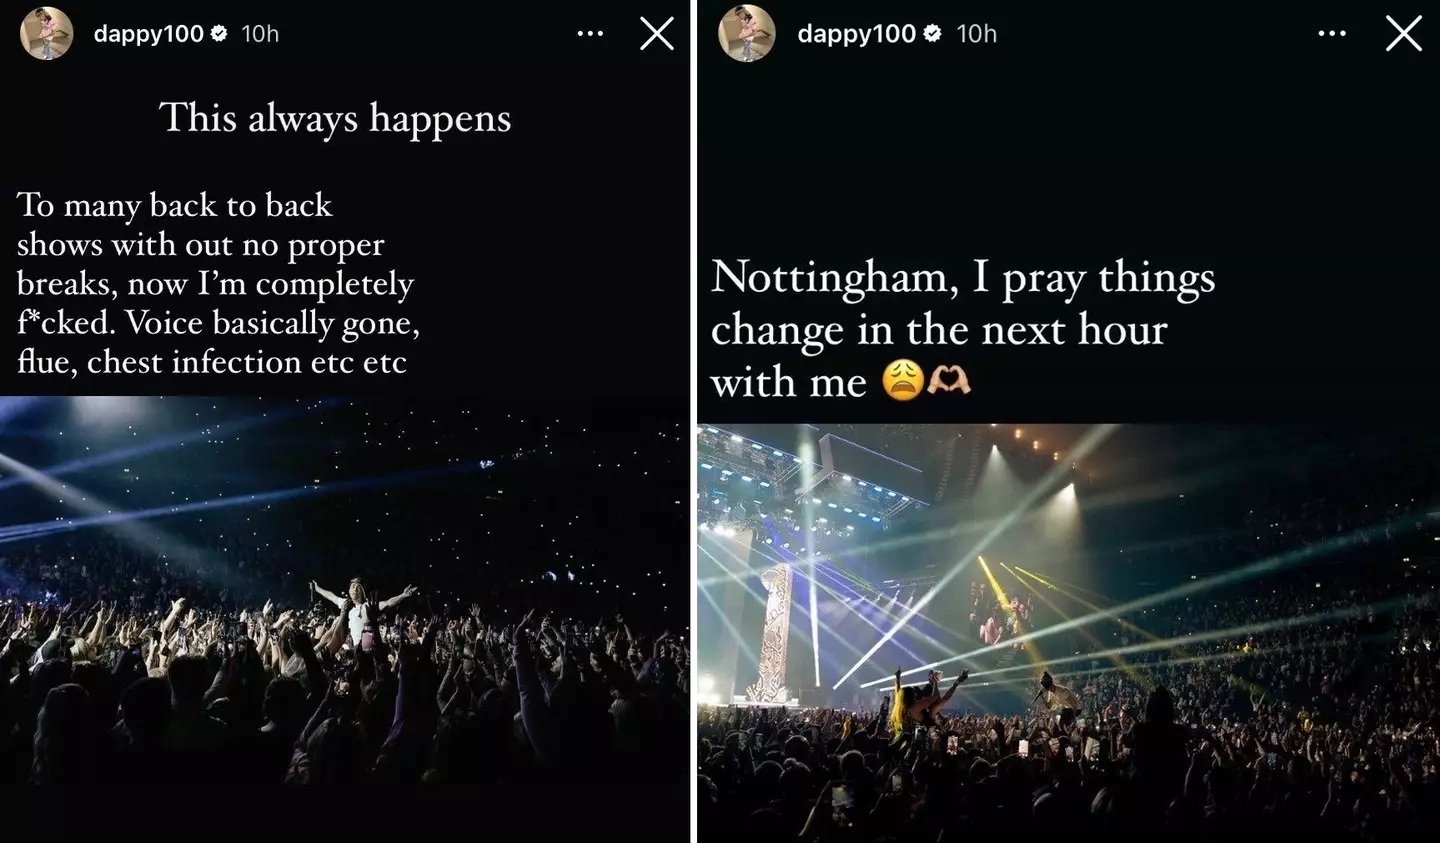 Dappy took to Instagram to share his health concerns with fans ahead of the show.